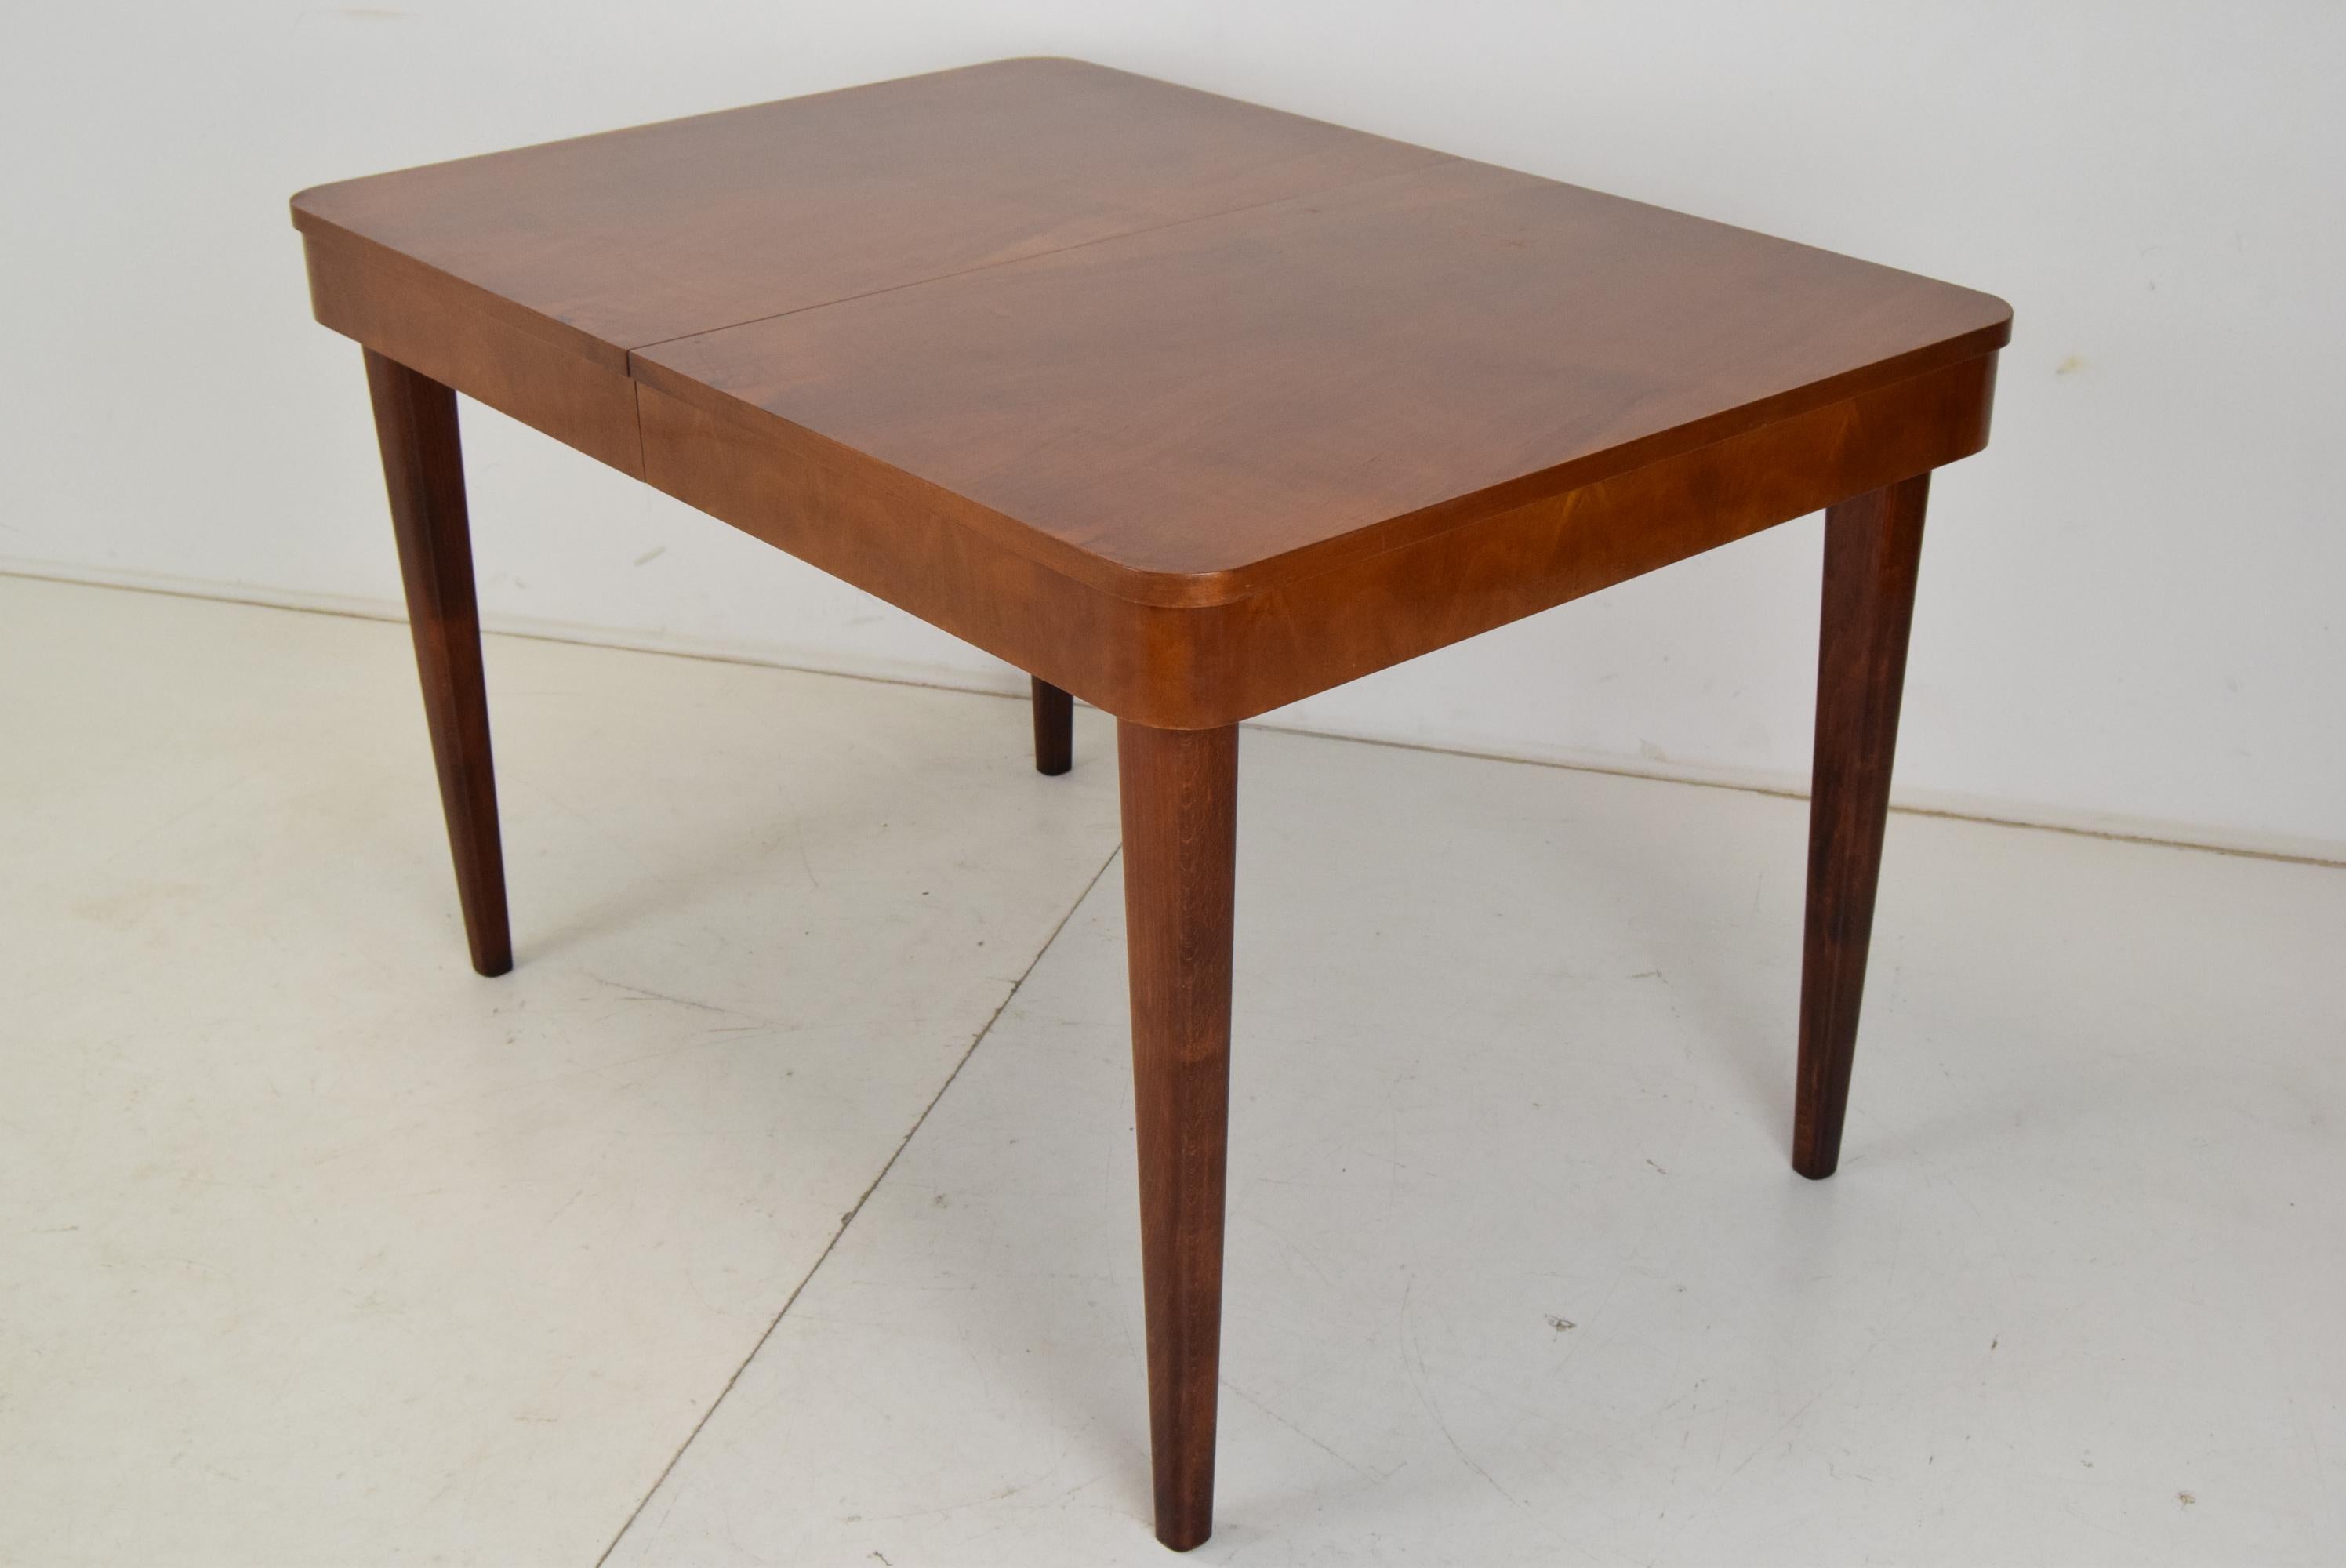 
Made in Czechoslovakia
Made of Wood
Dimension of extending width 190cm
The table legs can be removed
Original condition.